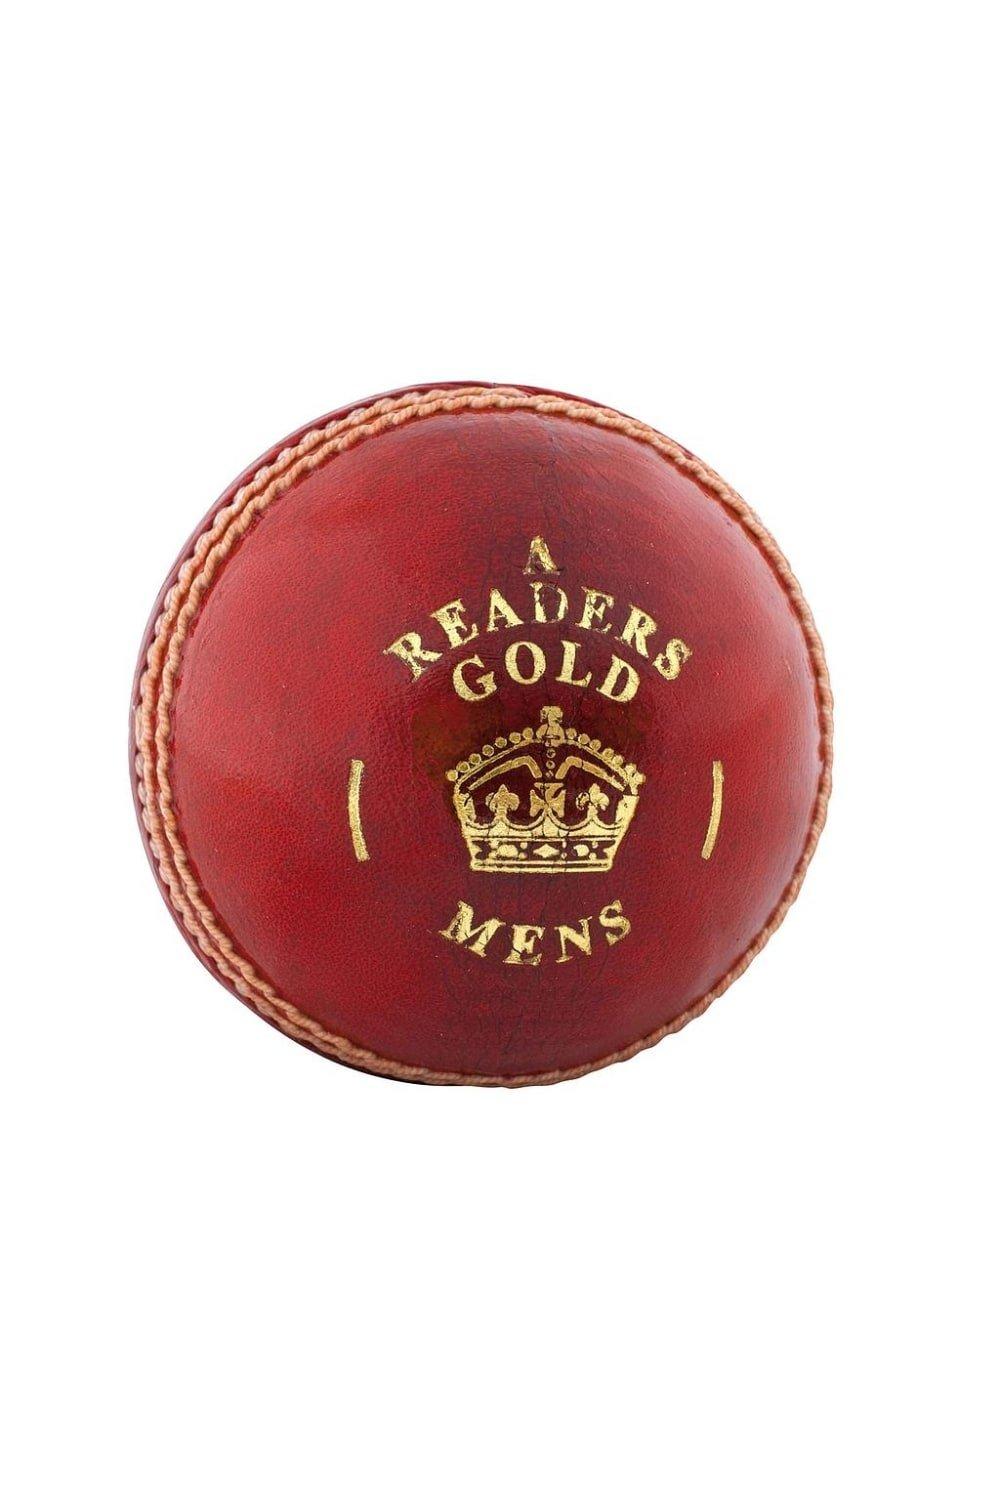 Gold A Leather Cricket Ball